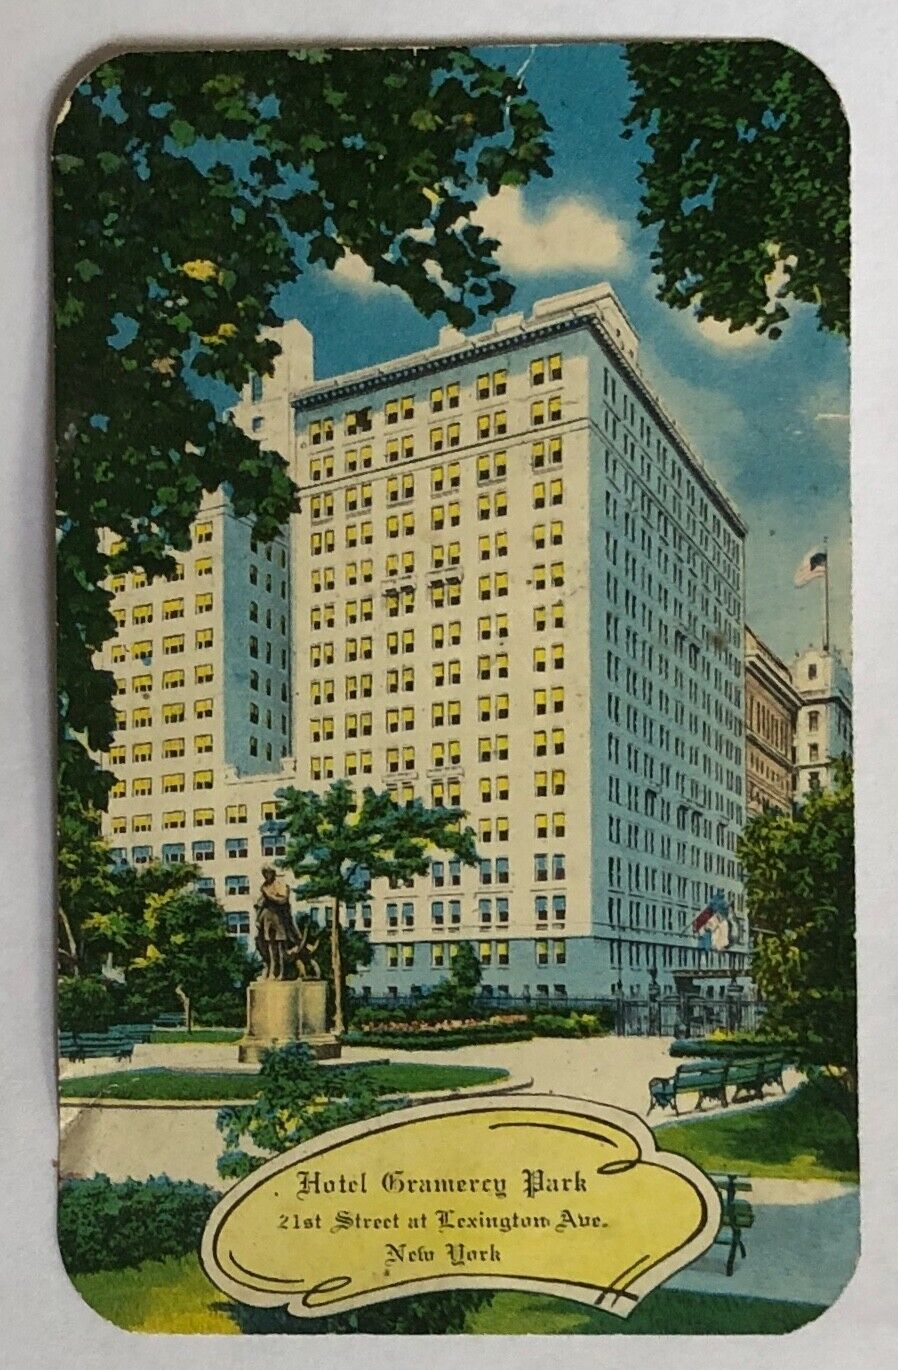 Hotel Gramercy Park I.D. Photo Card signed by Owner Charles Schwefel 1950